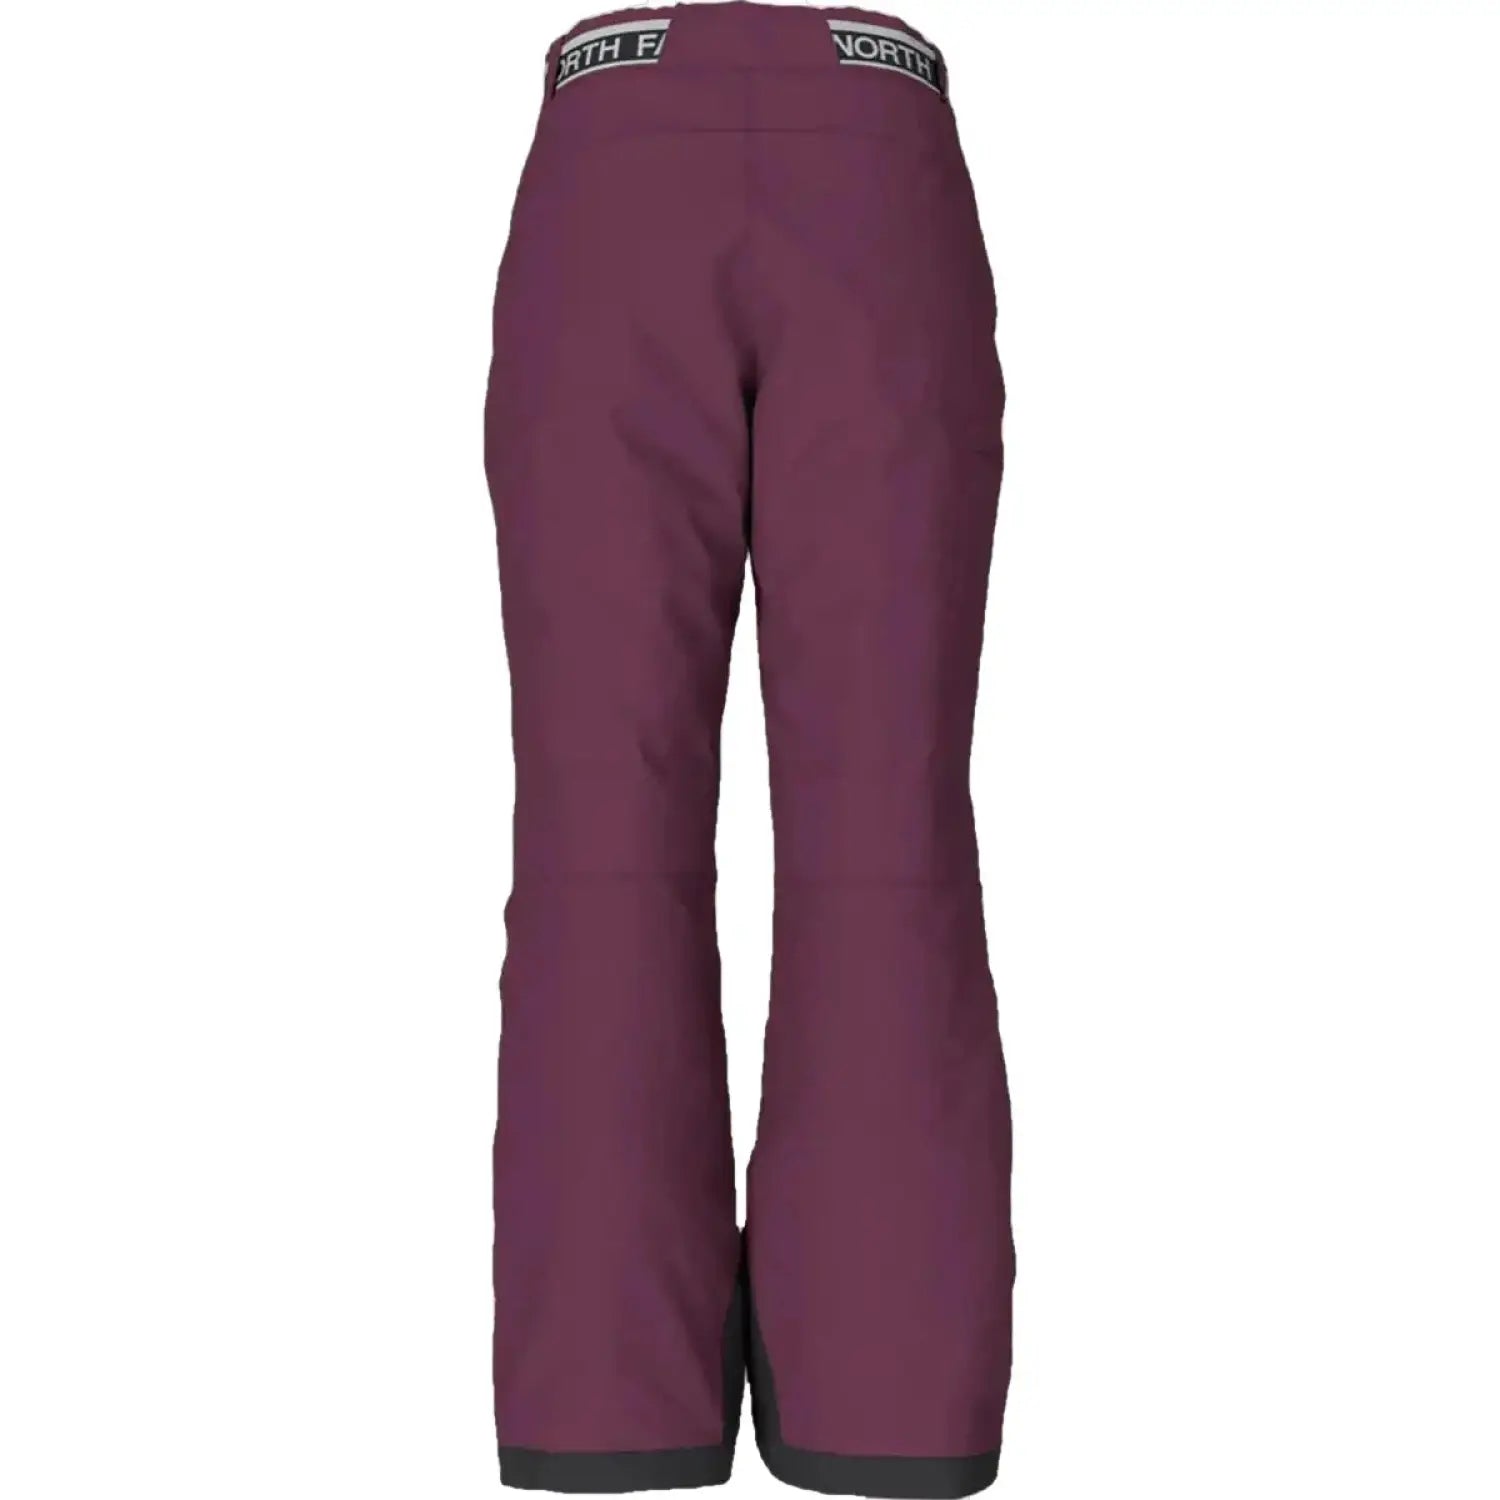 The North Face Girl's Freedom Insulated Pant show in the Boysenberry color option. Back view.